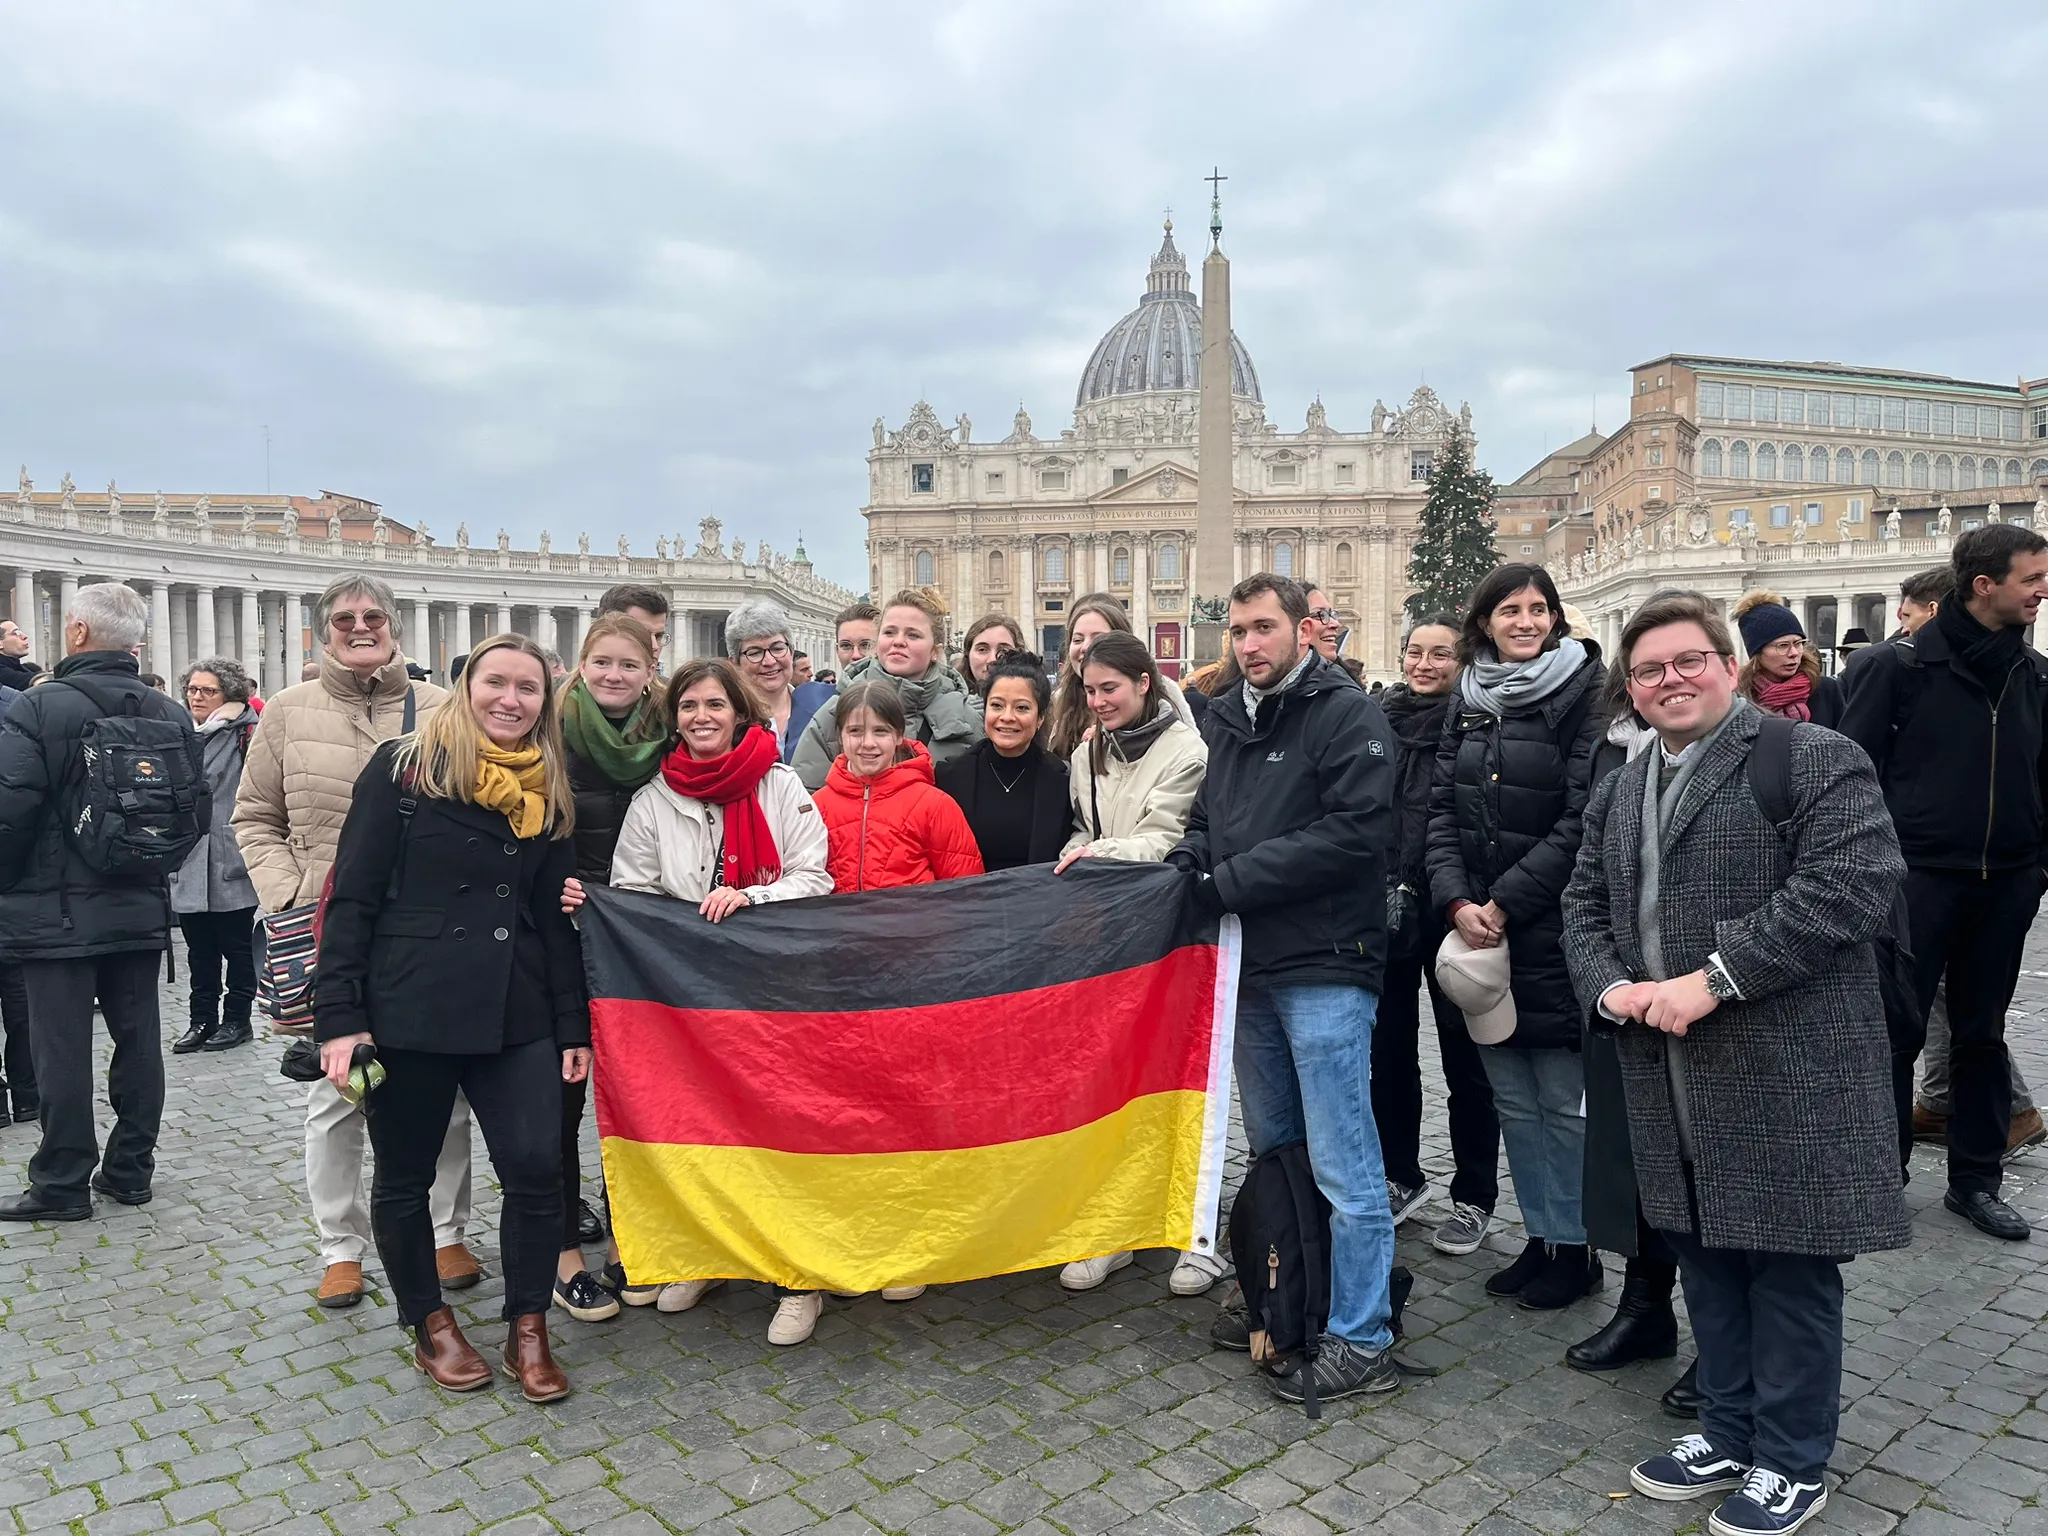 Tabea Schneider (far left) with a group of other pilgrims who traveled 20 hours by bus from Cologne, Germany, to attend the funeral of Pope Benedict XVI on Jan. 5, 2023, in St. Peter's Square at the Vatican. Courtney Mares / CNA